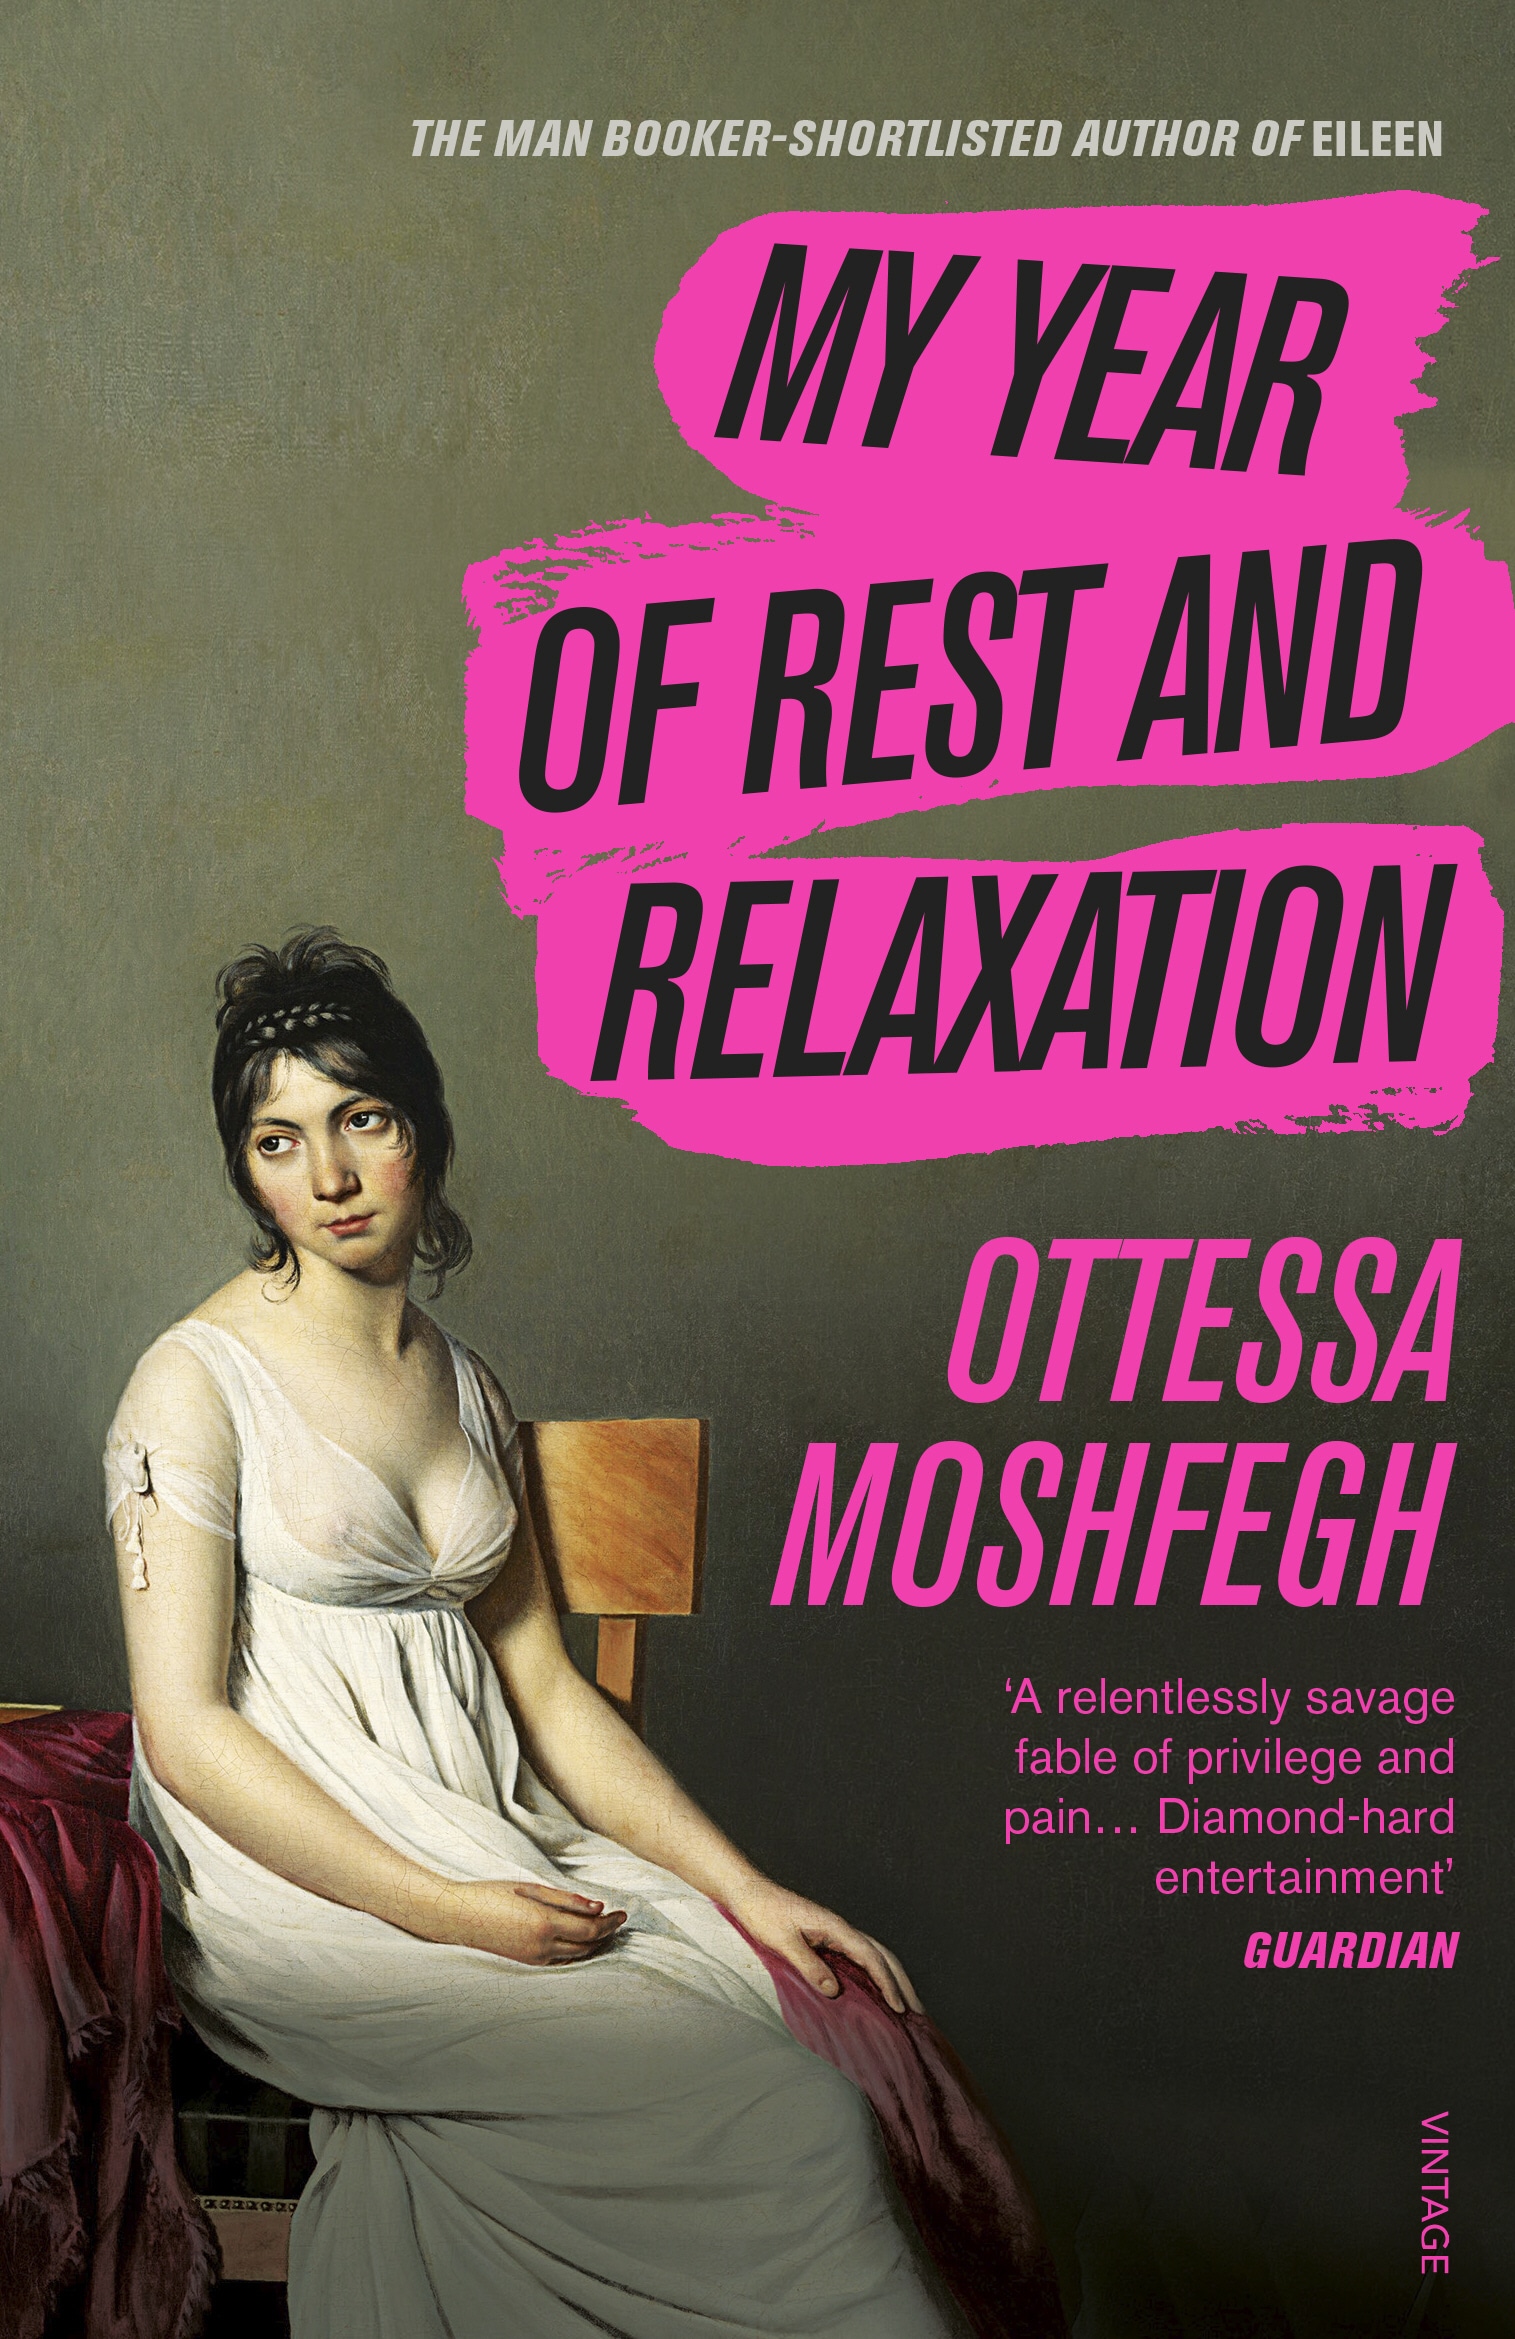 Book “My Year of Rest and Relaxation” by Ottessa Moshfegh — May 2, 2019